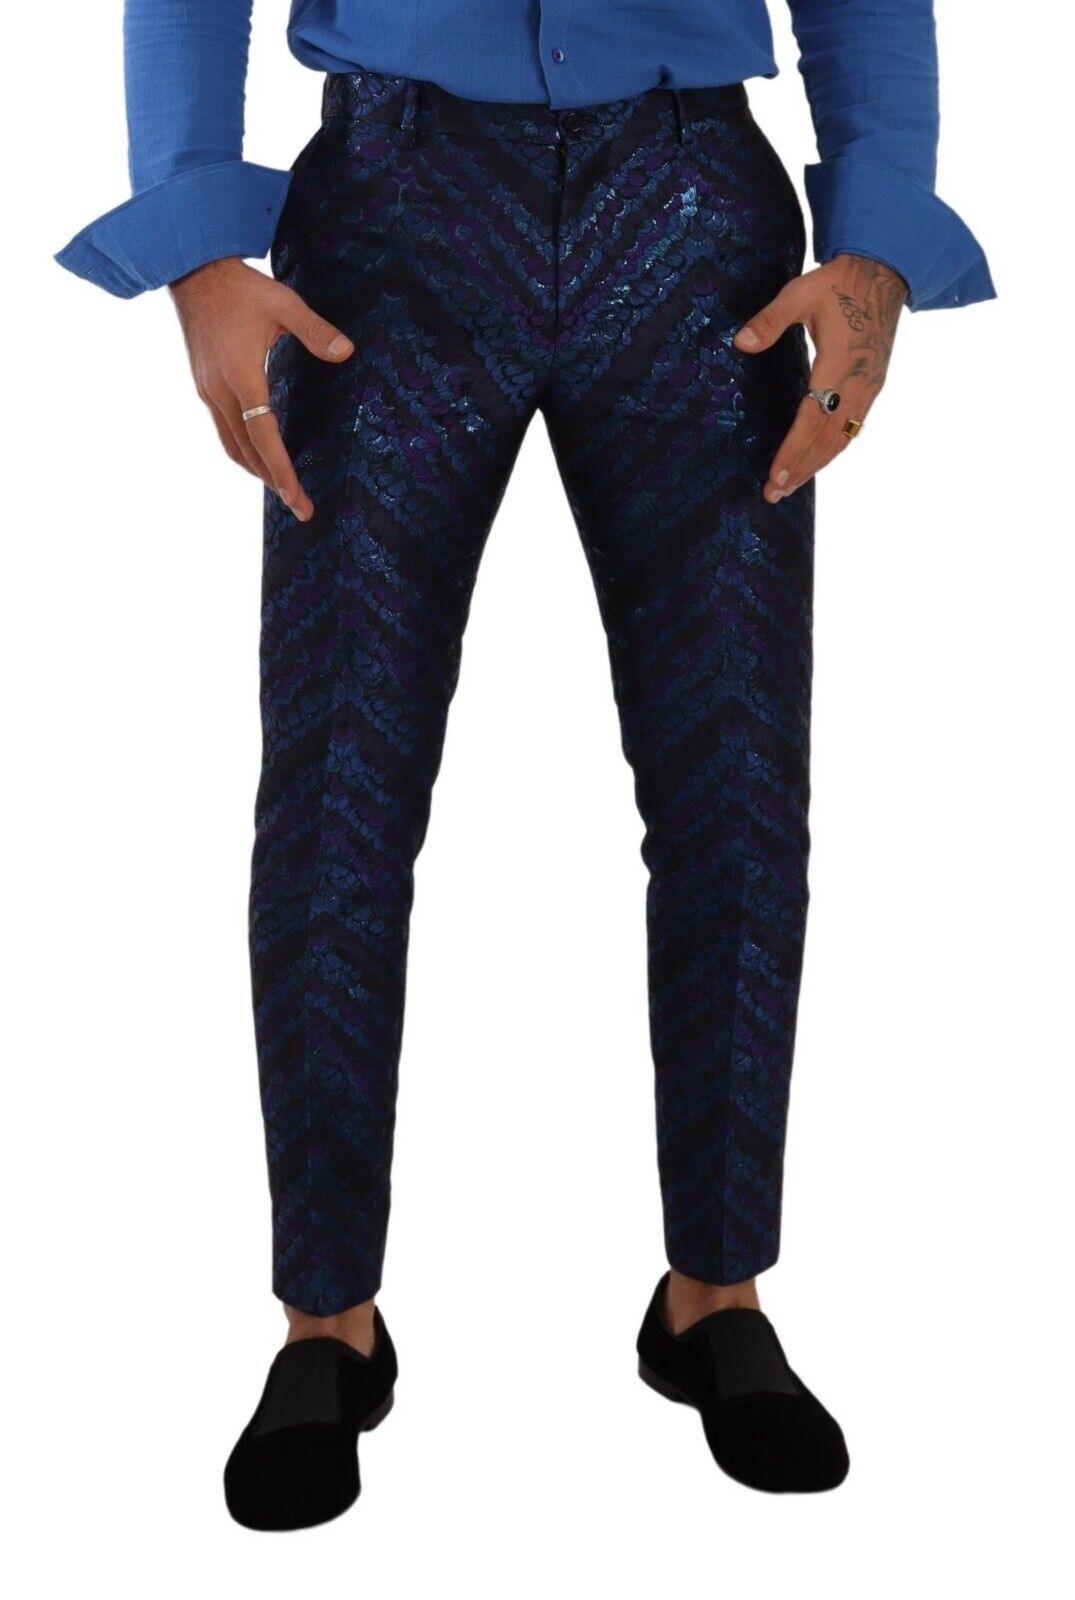 Blue Purple Jacquard Formal Trouser Dress Pants - Designed by Dolce & Gabbana Available to Buy at a Discounted Price on Moon Behind The Hill Online Designer Discount Store